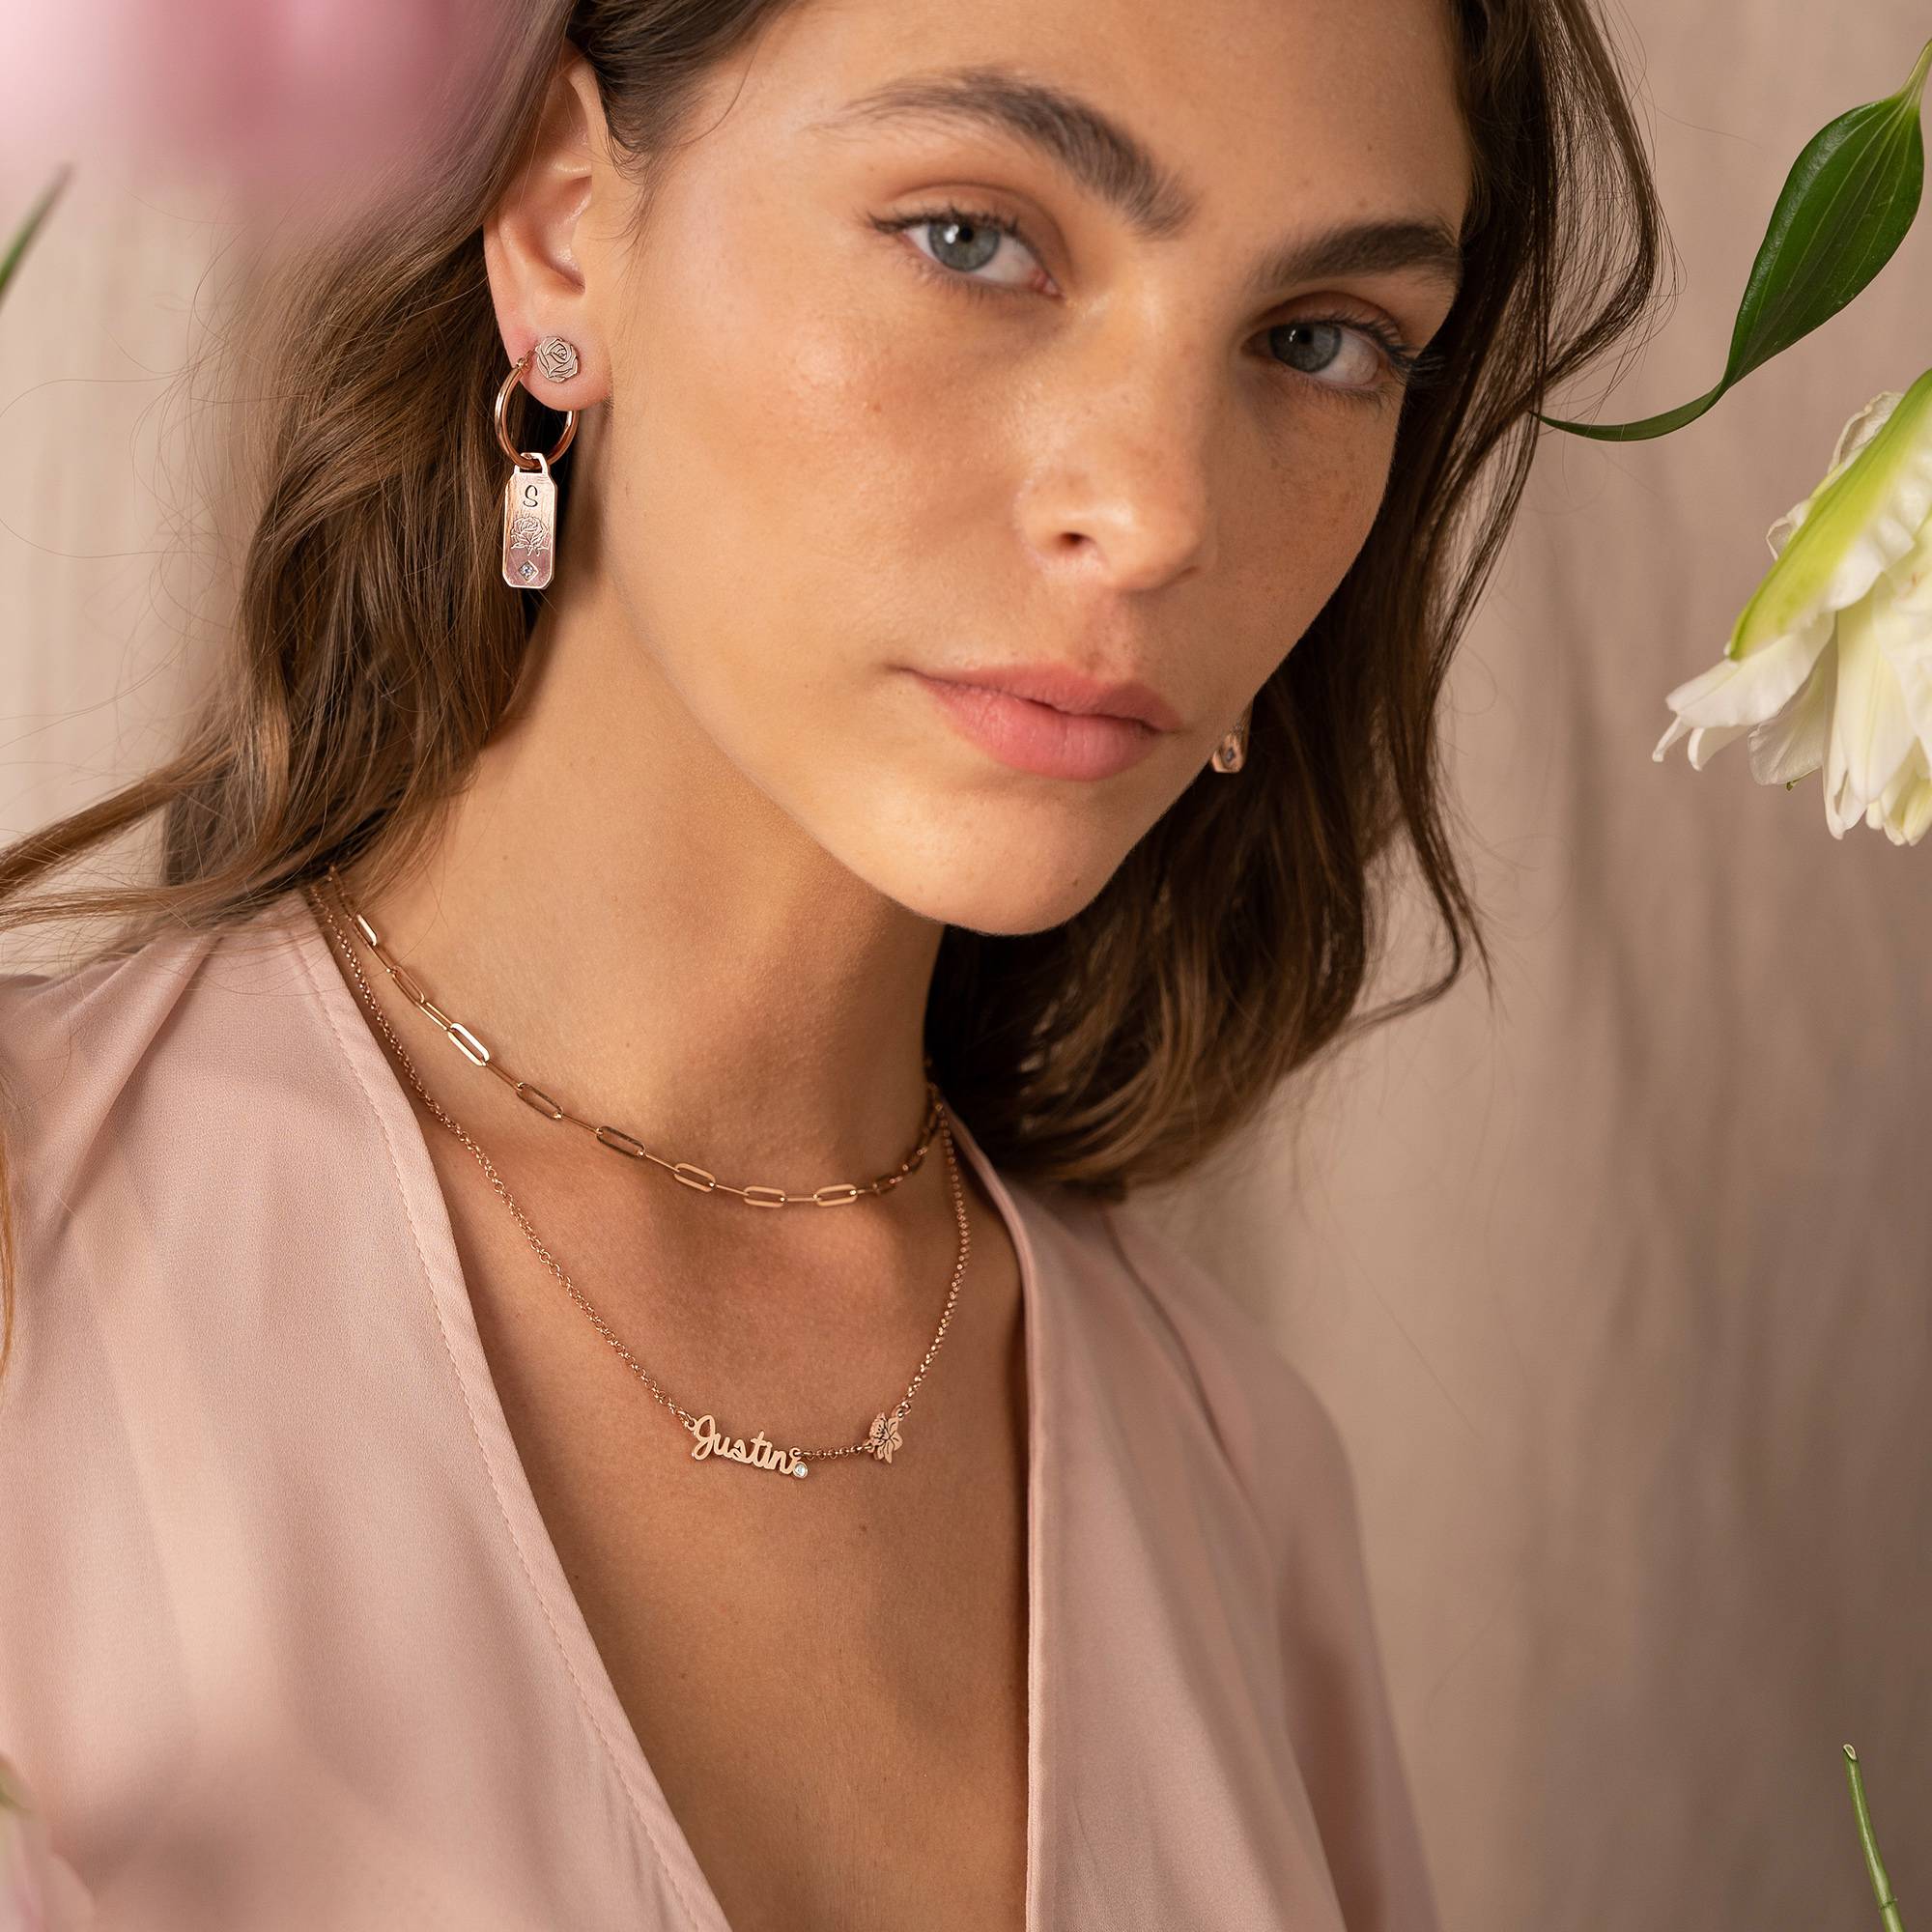 Blooming Birth Flower Multi Name Necklace with Diamond in 18K Rose Gold Plating-3 product photo